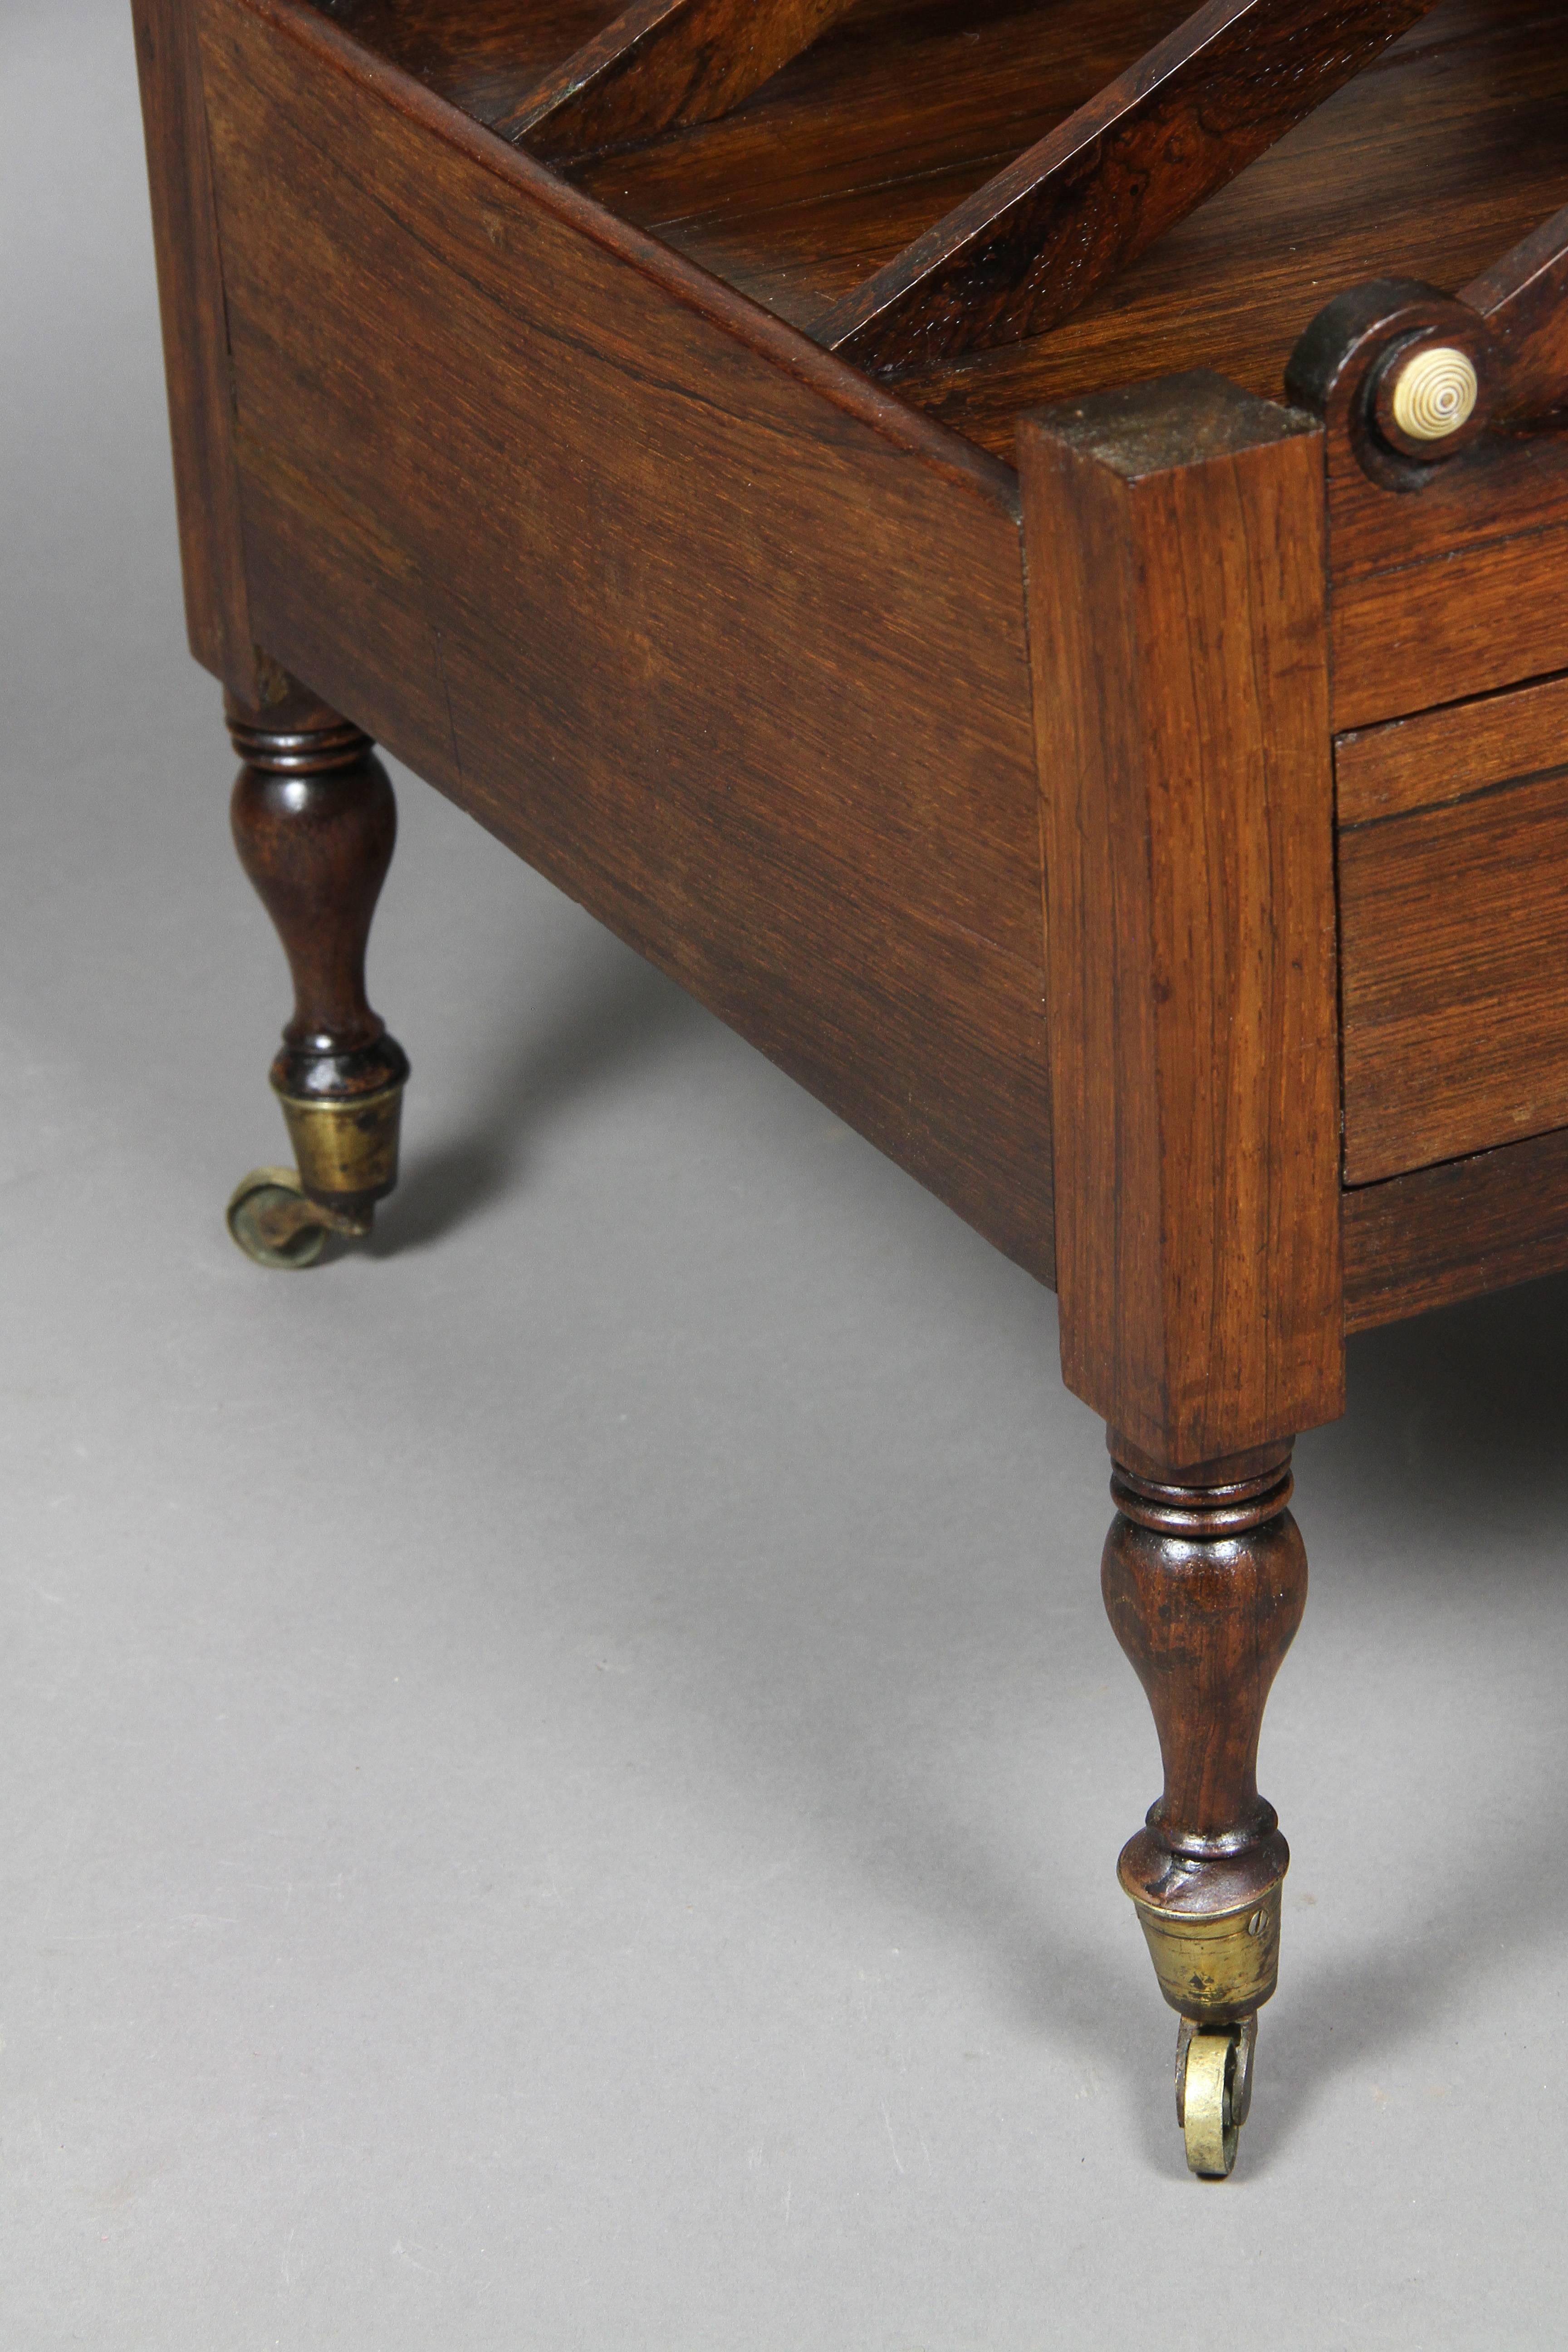 Rectangular with wreath carving, single drawer, raised on turned tapered legs with casters.